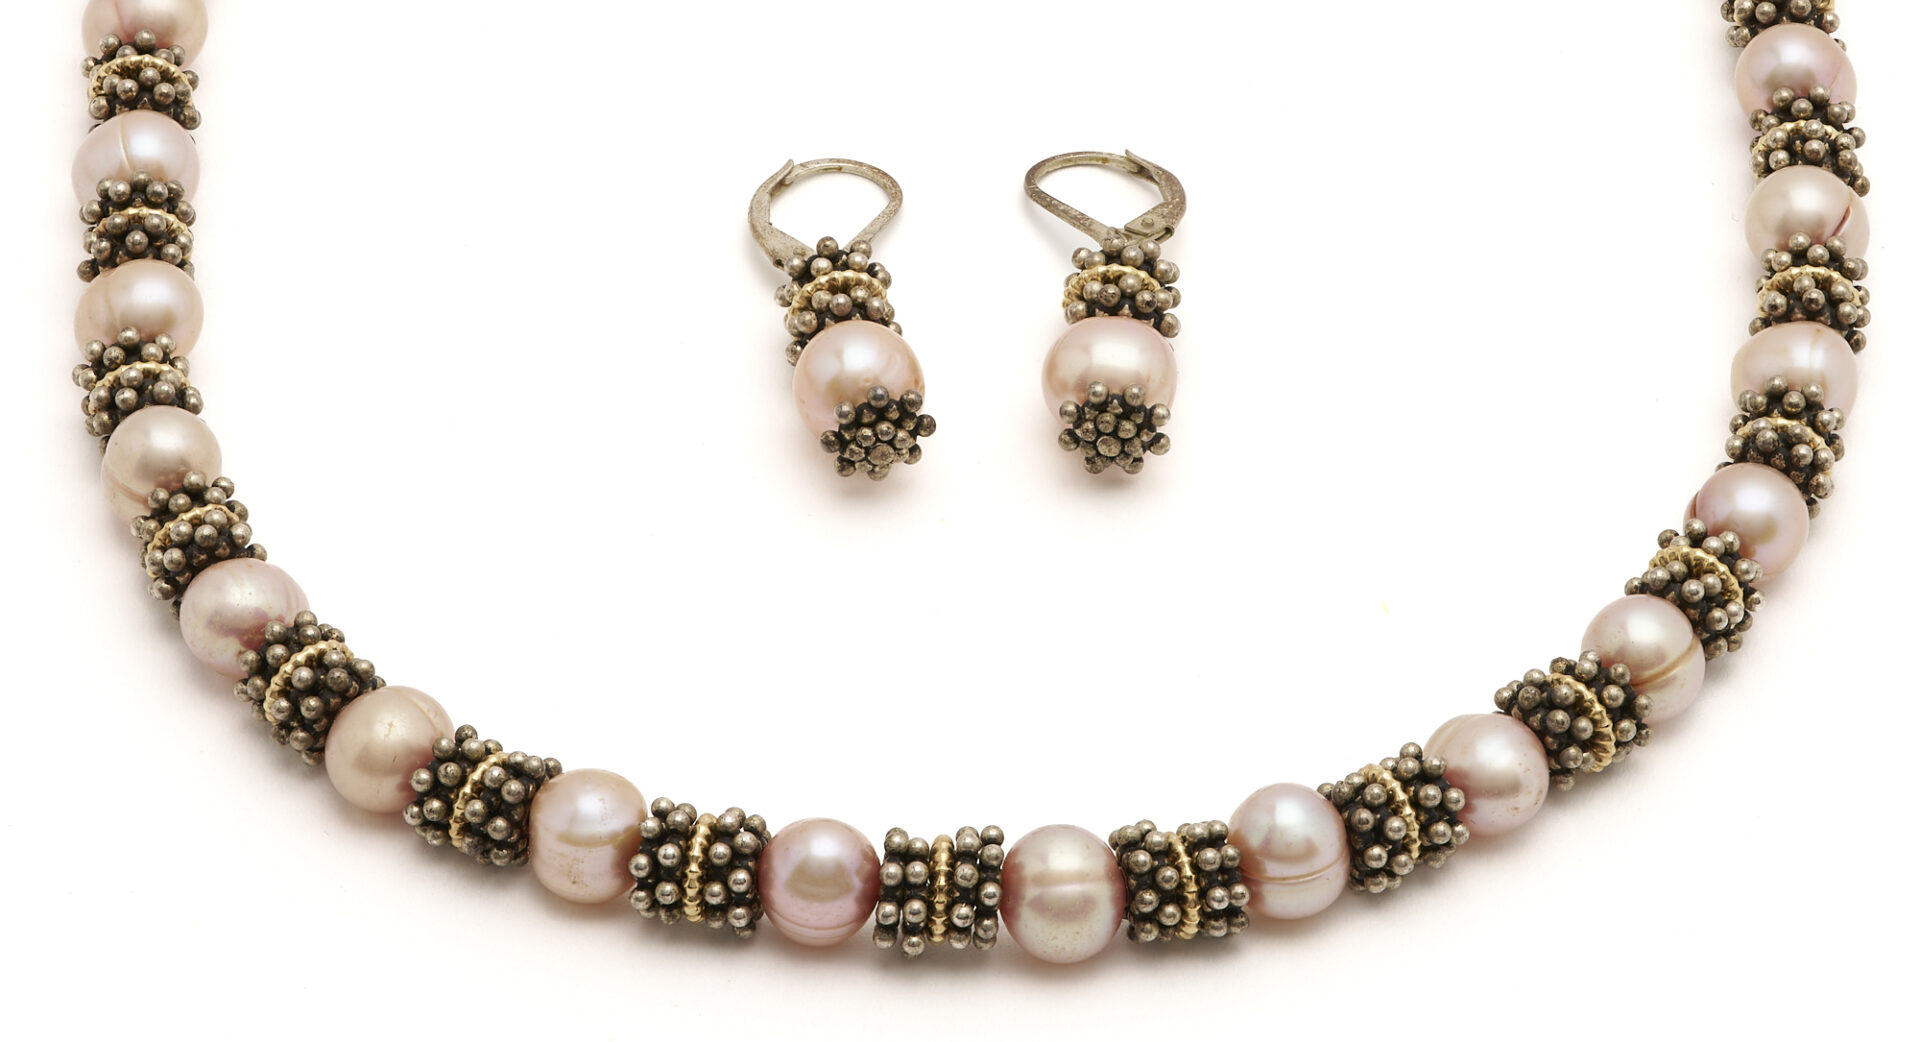 Lot 785: Designer Silver, Gold, & Pearl Necklace with Matching Earrings, Sadye L Vassil